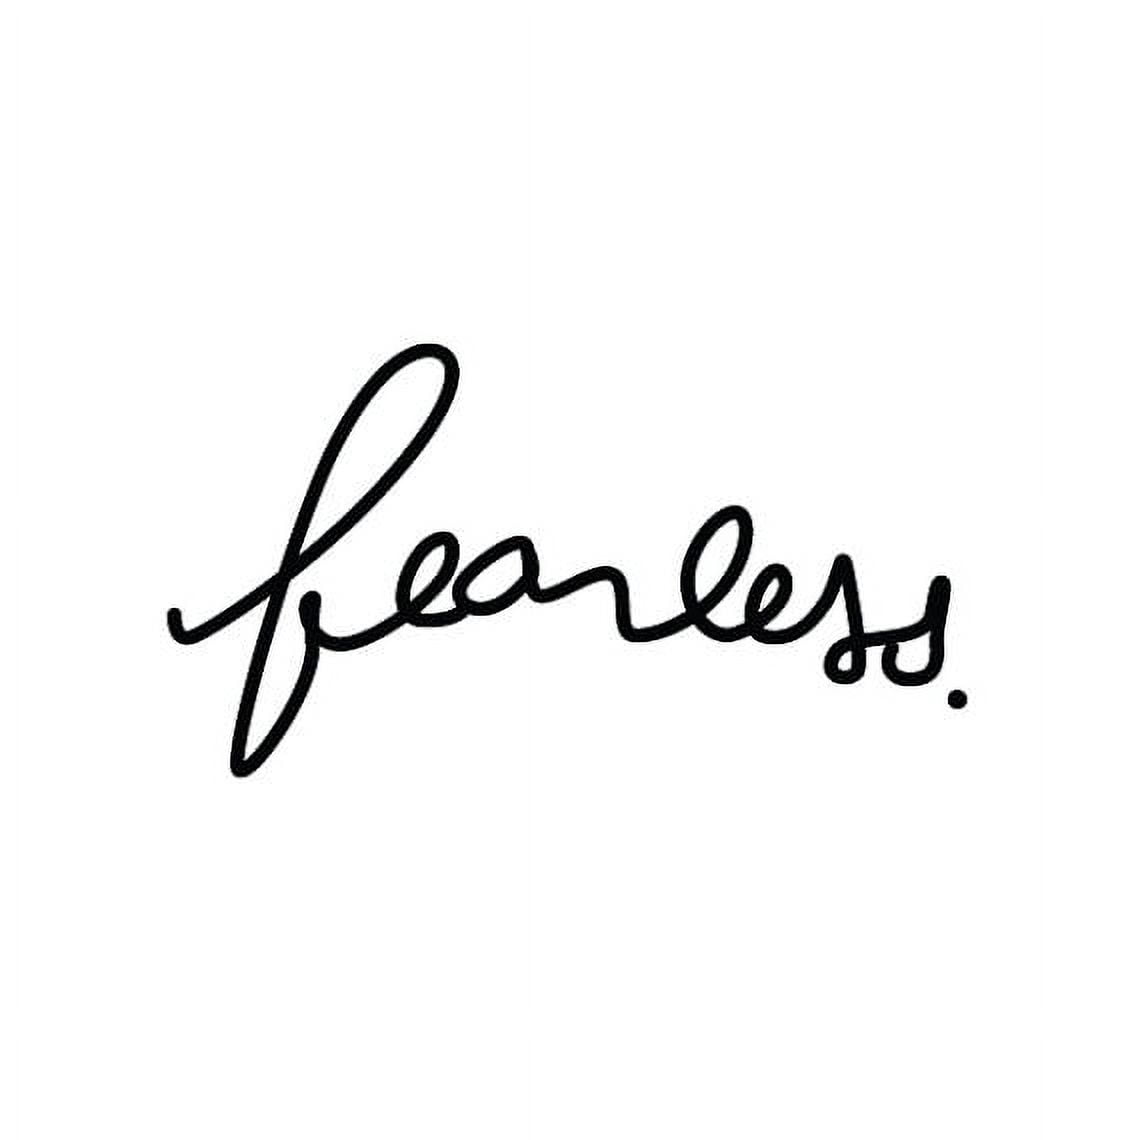 Fearless - Elegant Vintage Girly Inspirational Tattoo Quotes Typography